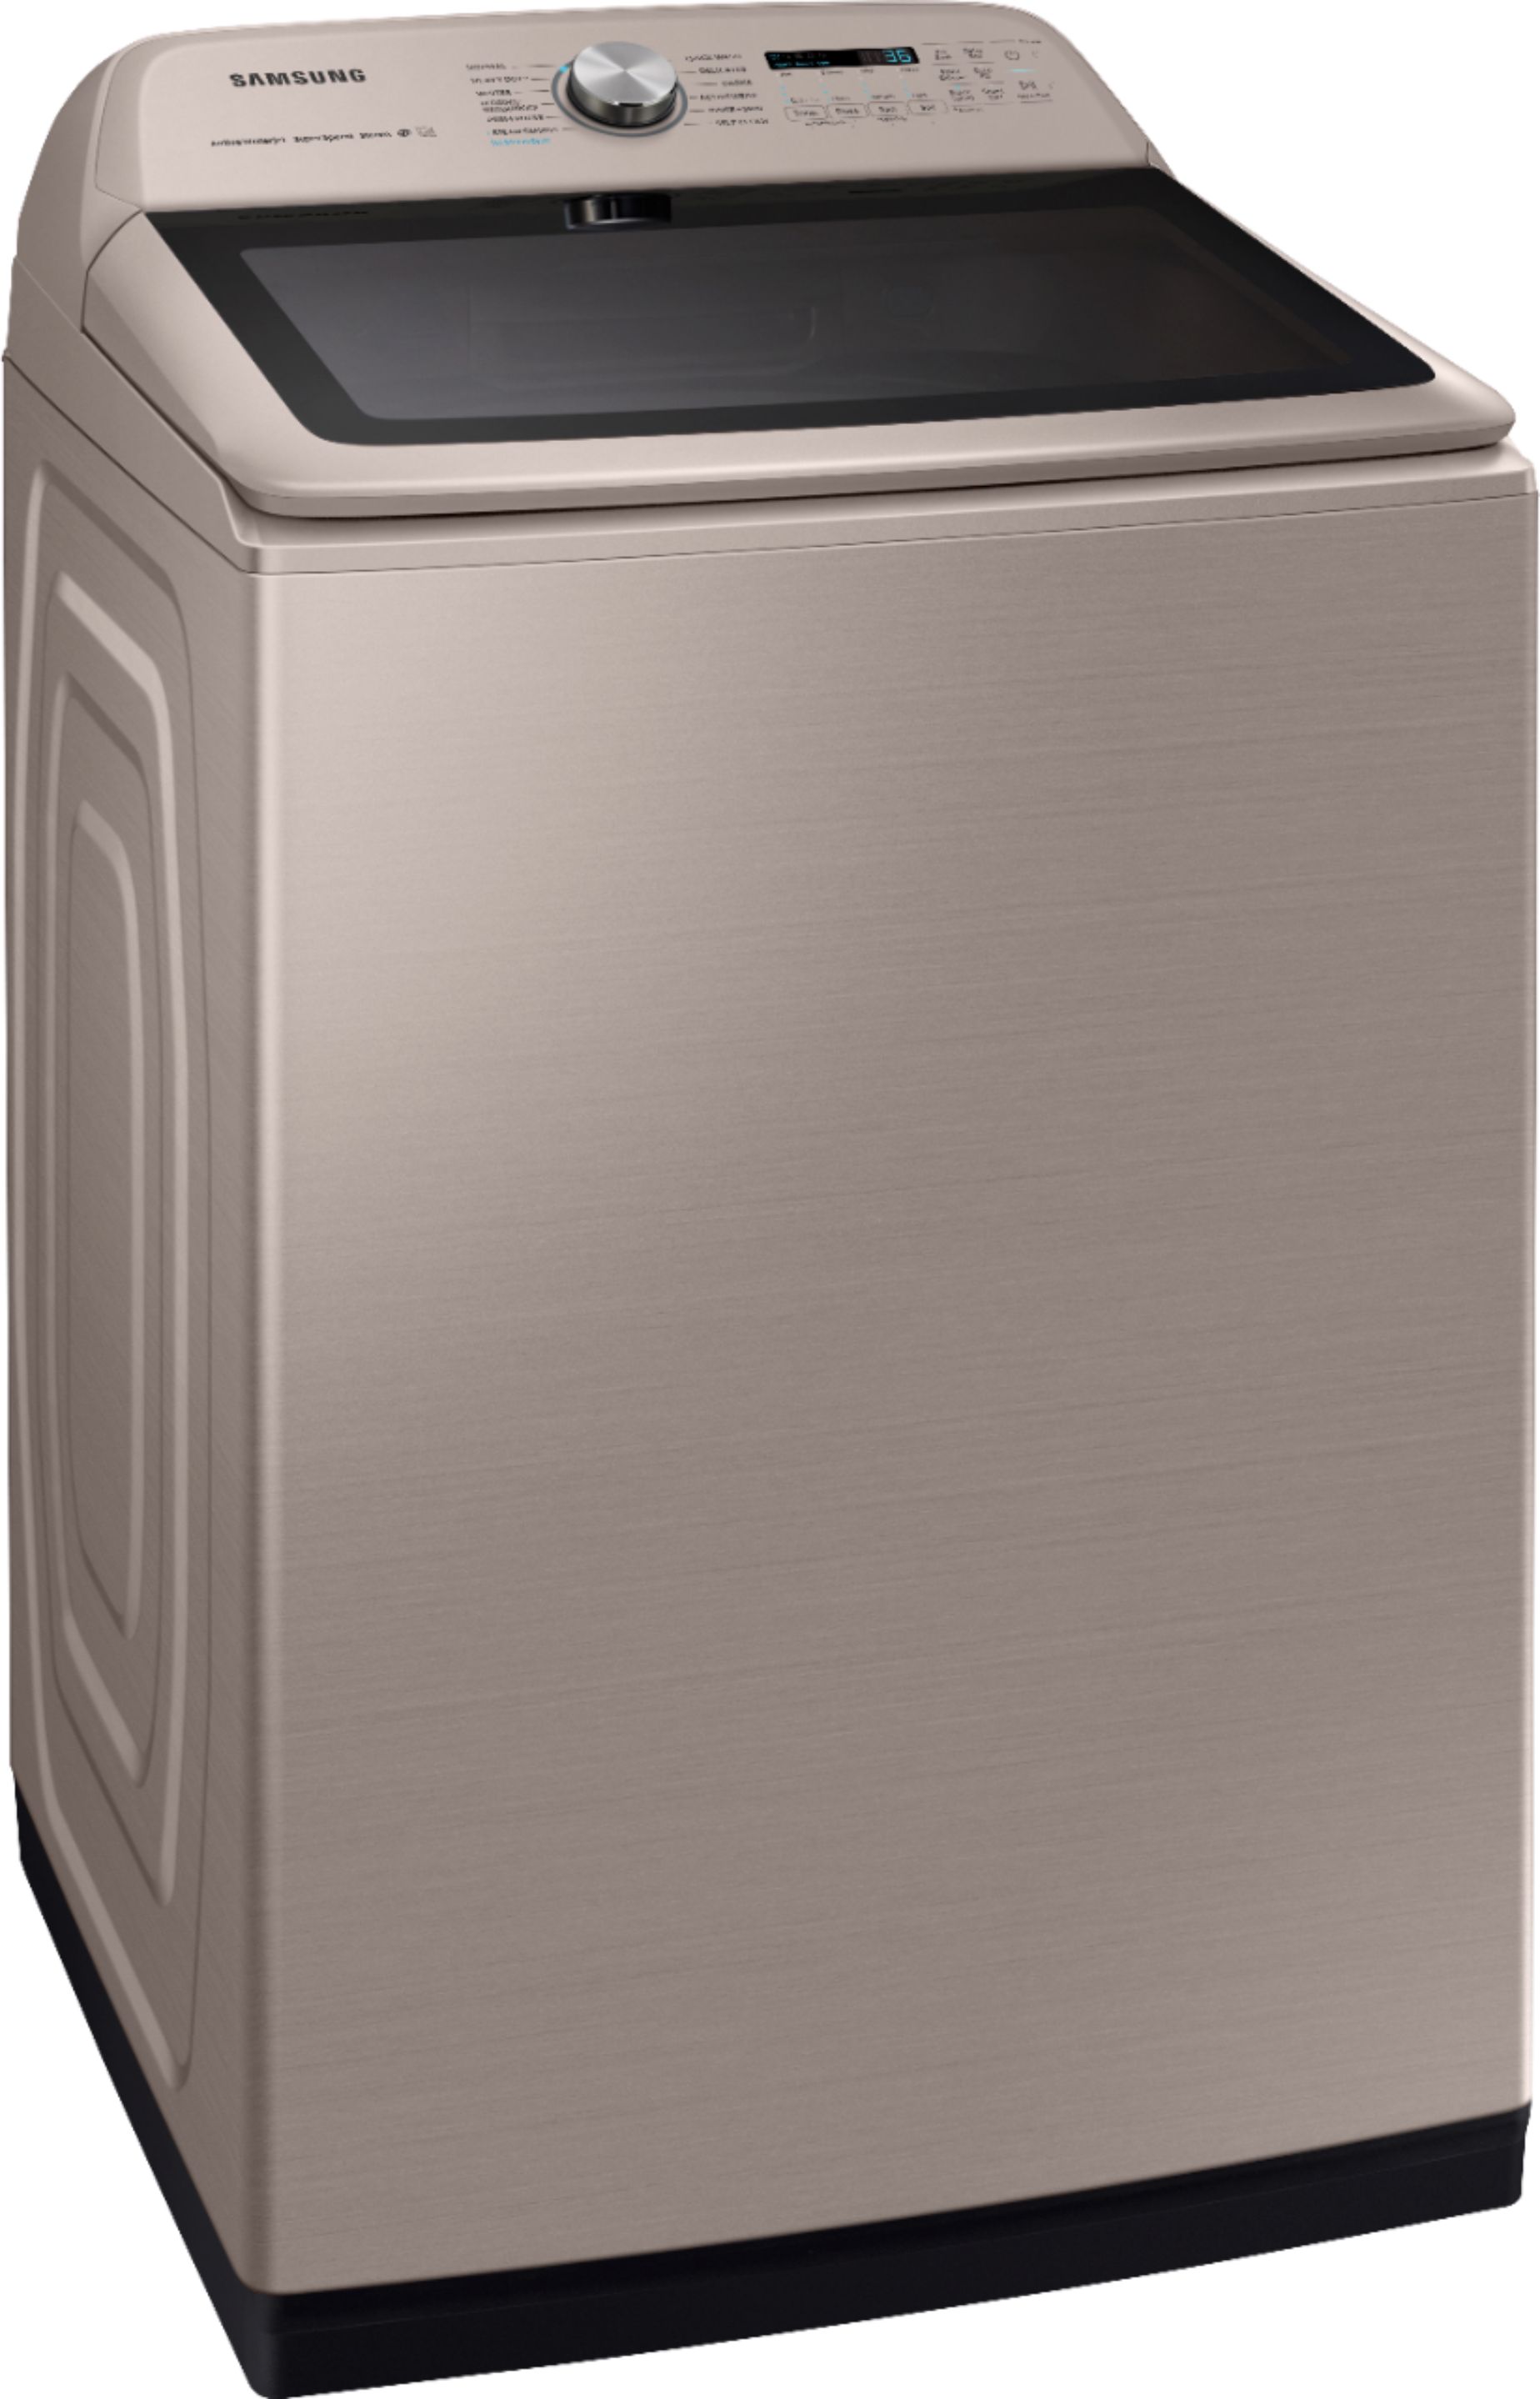 Angle View: Samsung - 5.4 Cu. Ft. High Efficiency Top Load Washer with Steam - Champagne